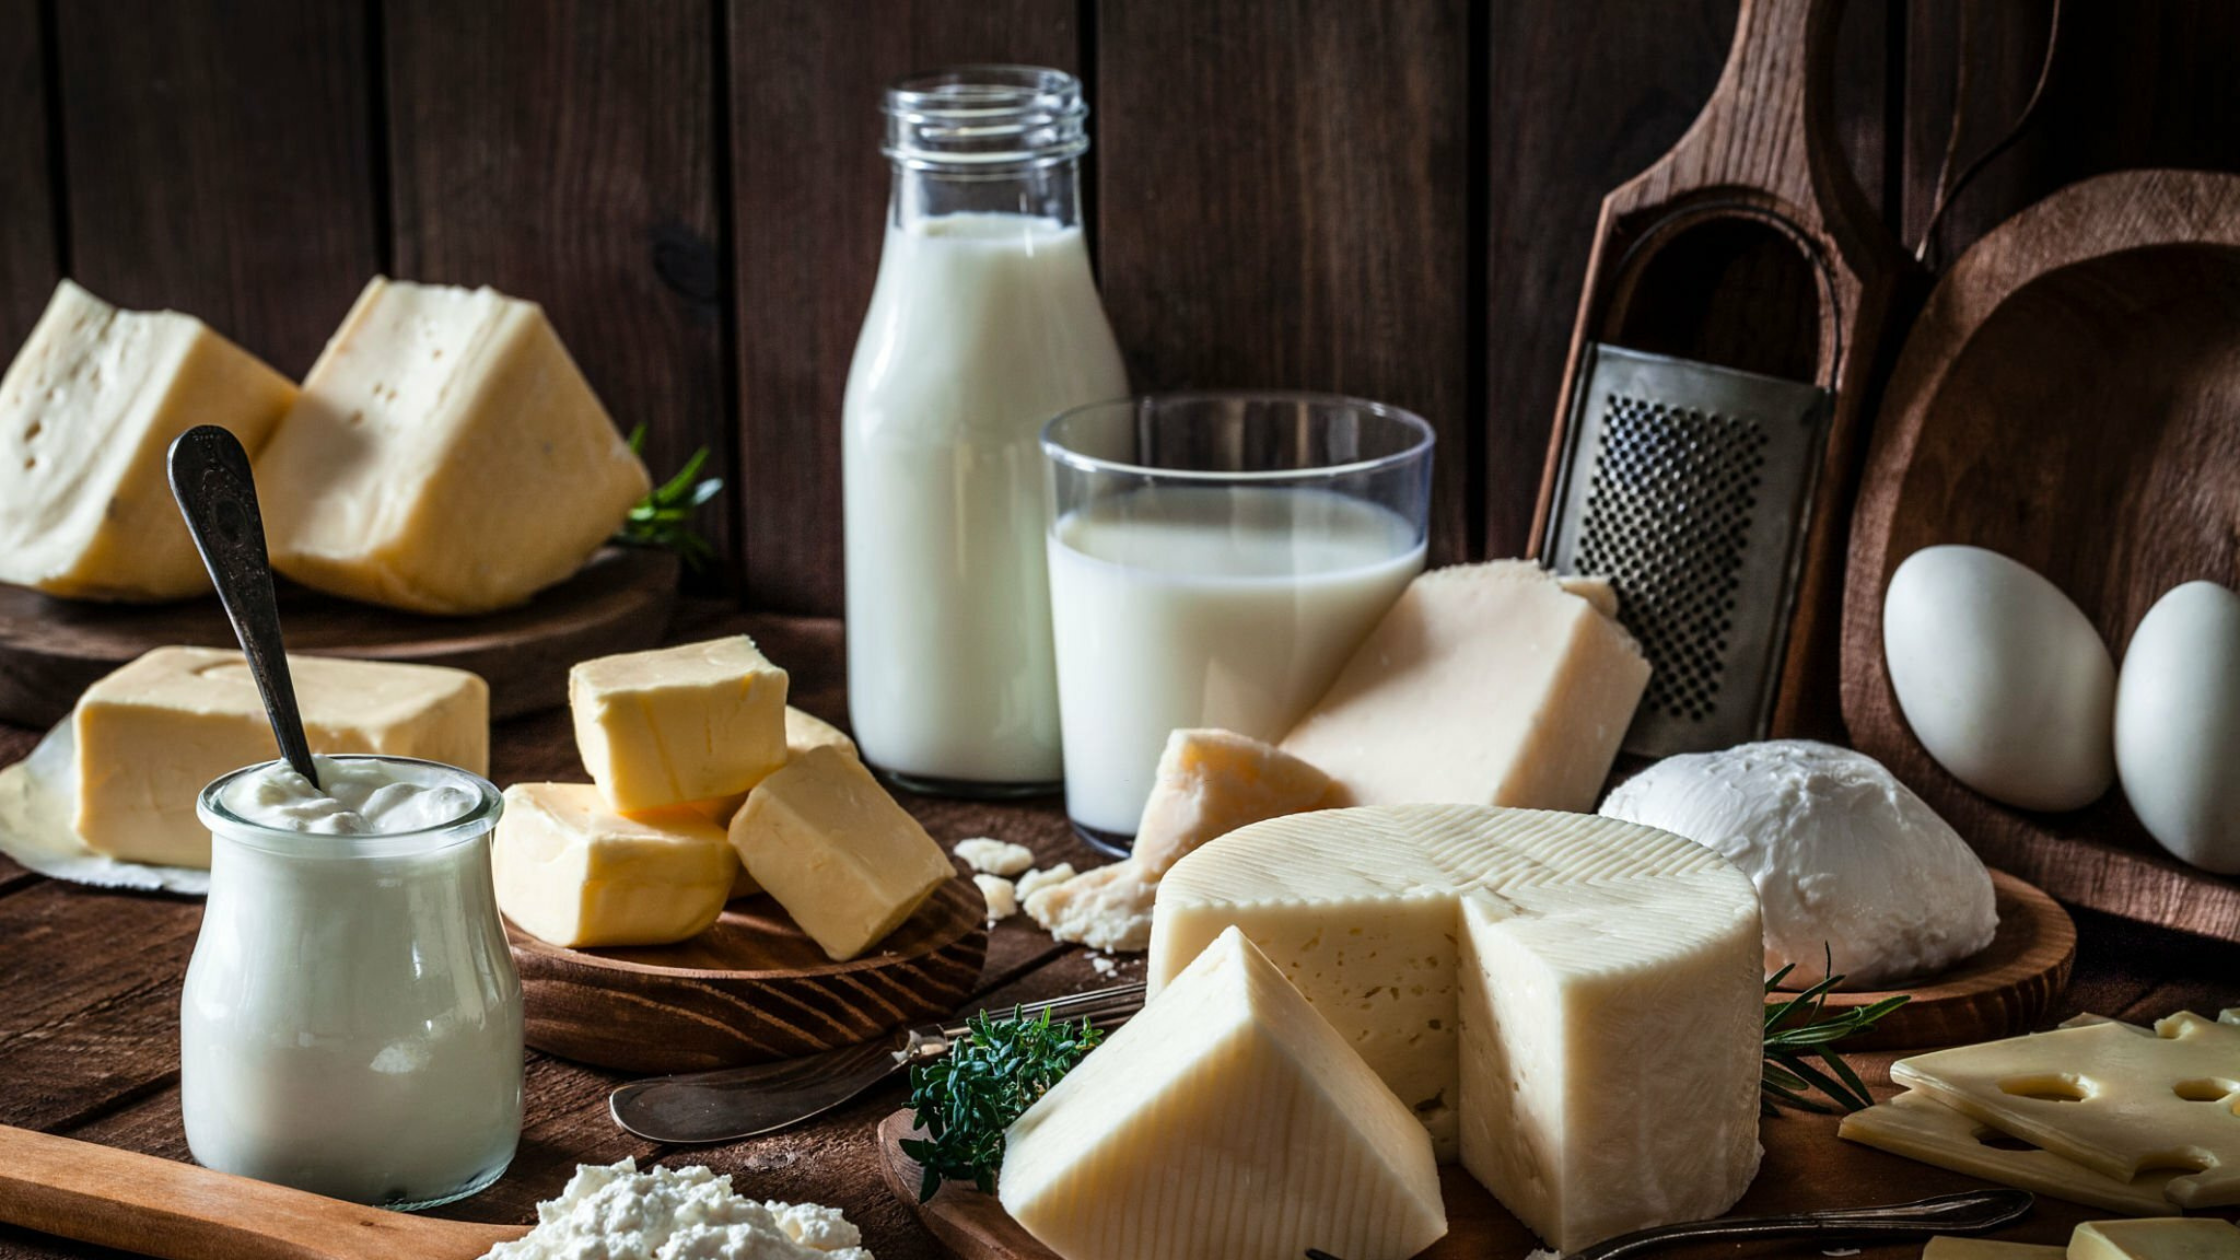 Dairy, Milk and the Risk of Asthma